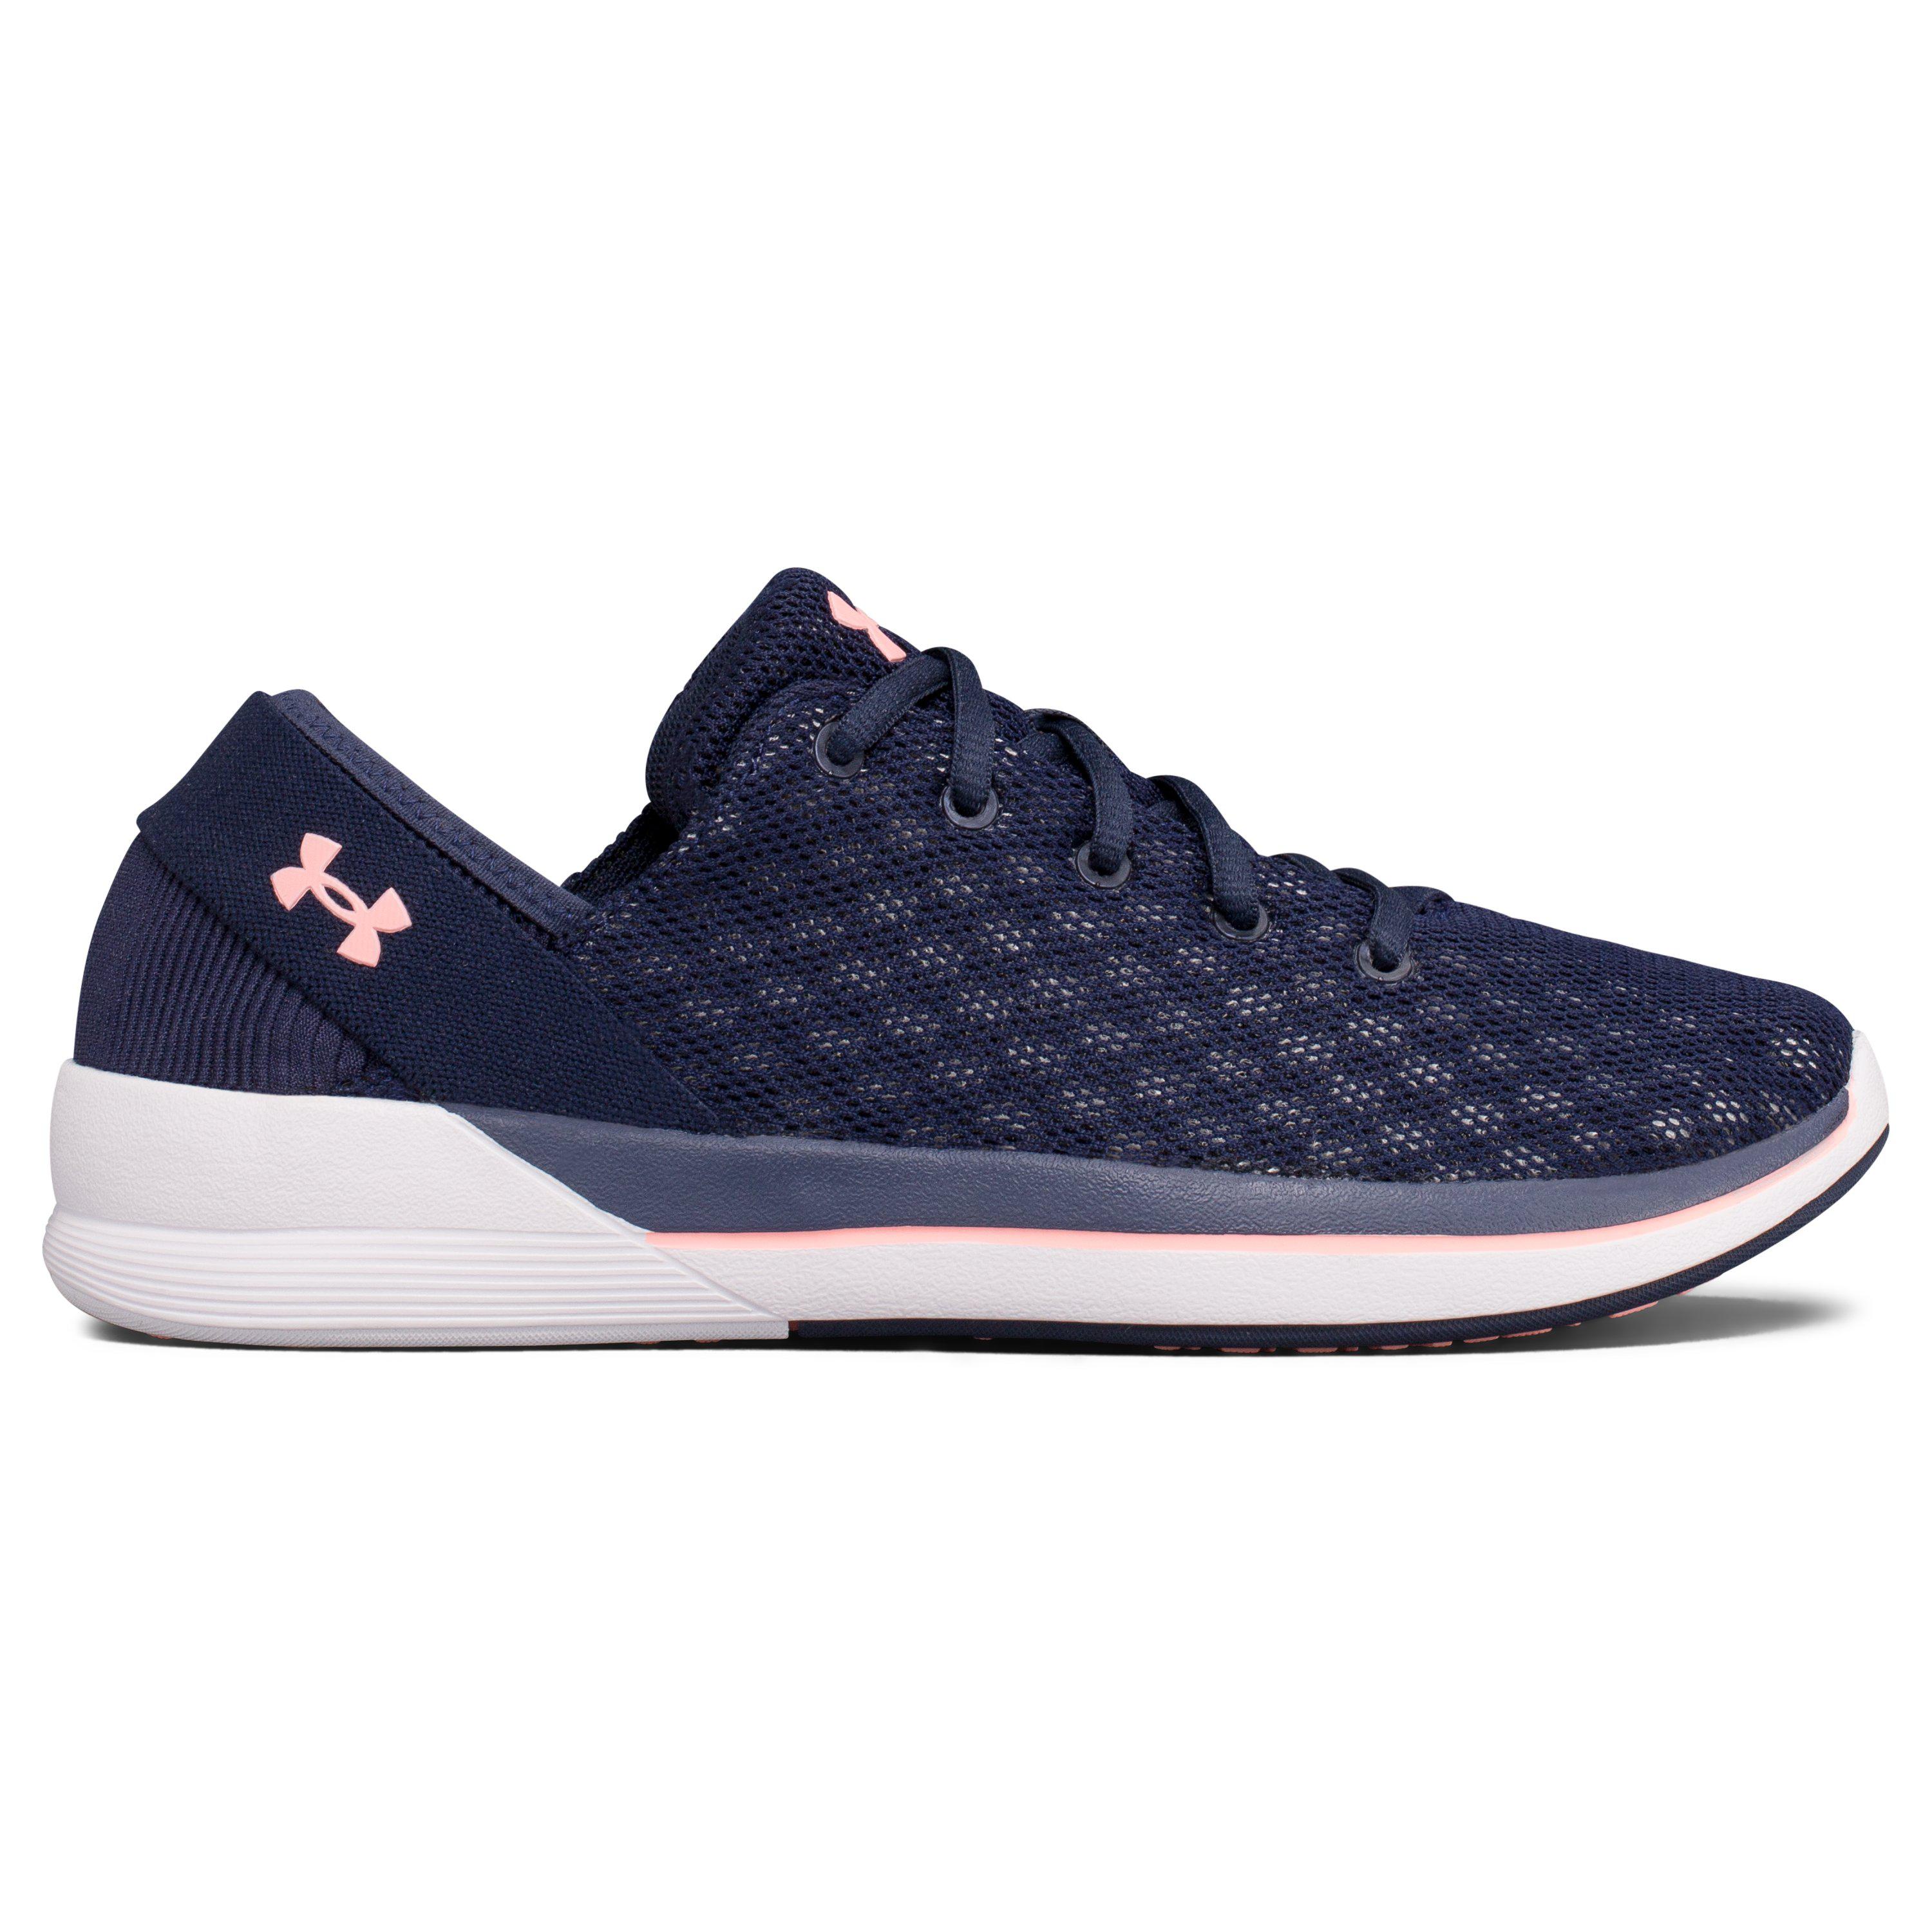 Under Armour Rubber Women's Ua Rotation Training Shoes in Midnight Navy ...